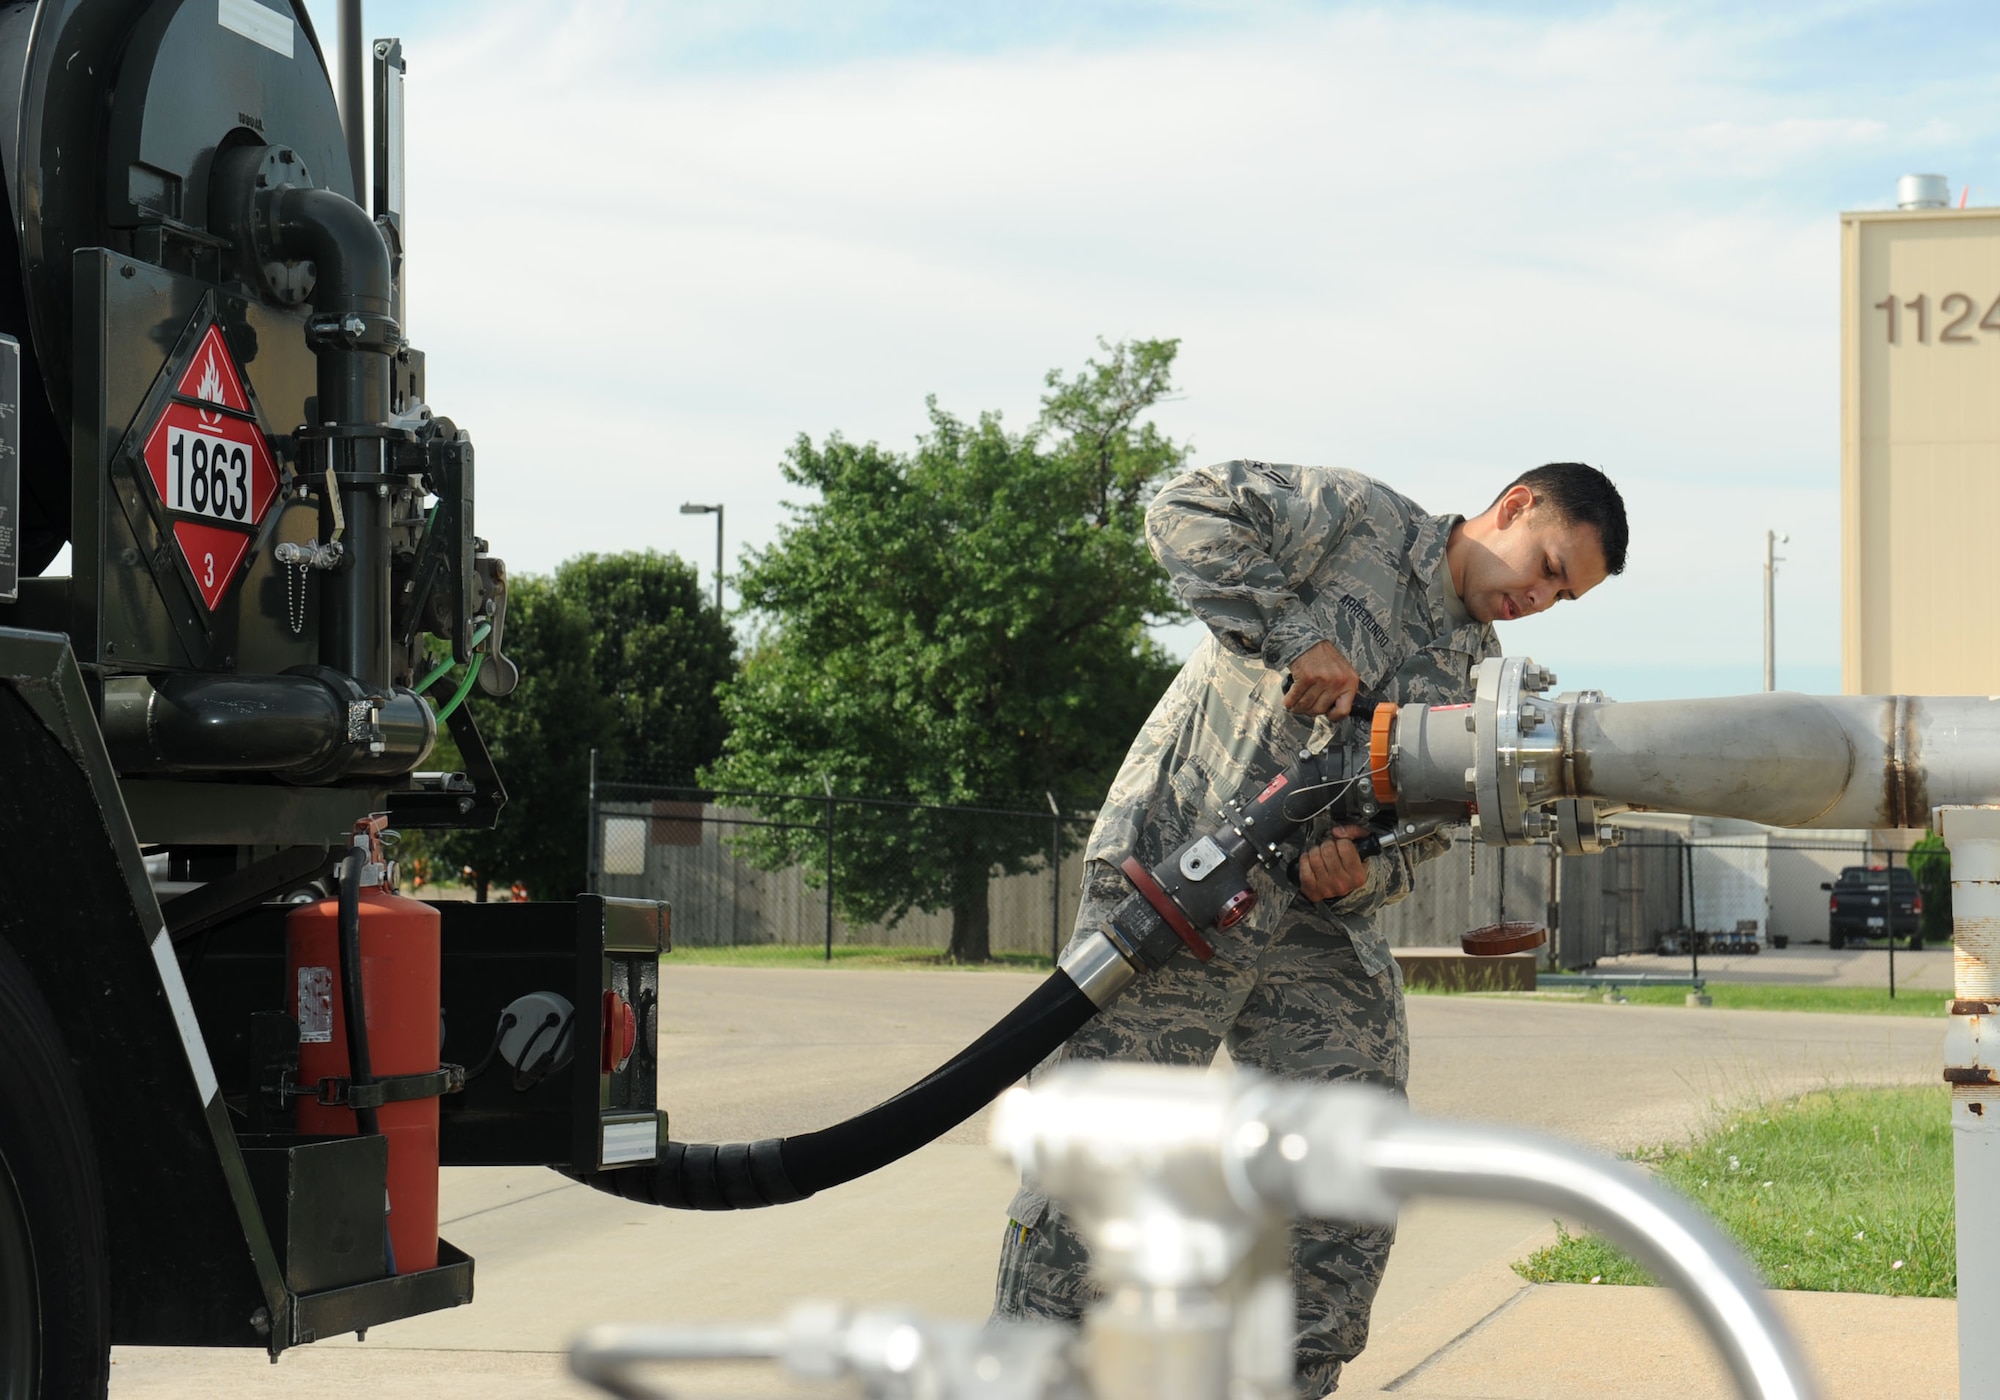 Airman 1st Class Jose Arredondo, 22nd Logistics Readiness Squadron petroleum, oils and lubricants apprentice, connects a fuel hose to a hydrant, July 19, 2016, at McConnell Air Force Base, Kan. This test needs to be done daily to ensure the fuel being transferred to KC-135 Stratotanker aircraft is clean and serviceable. (U.S. Air Force photo/Senior Airman David Bernal Del Agua)